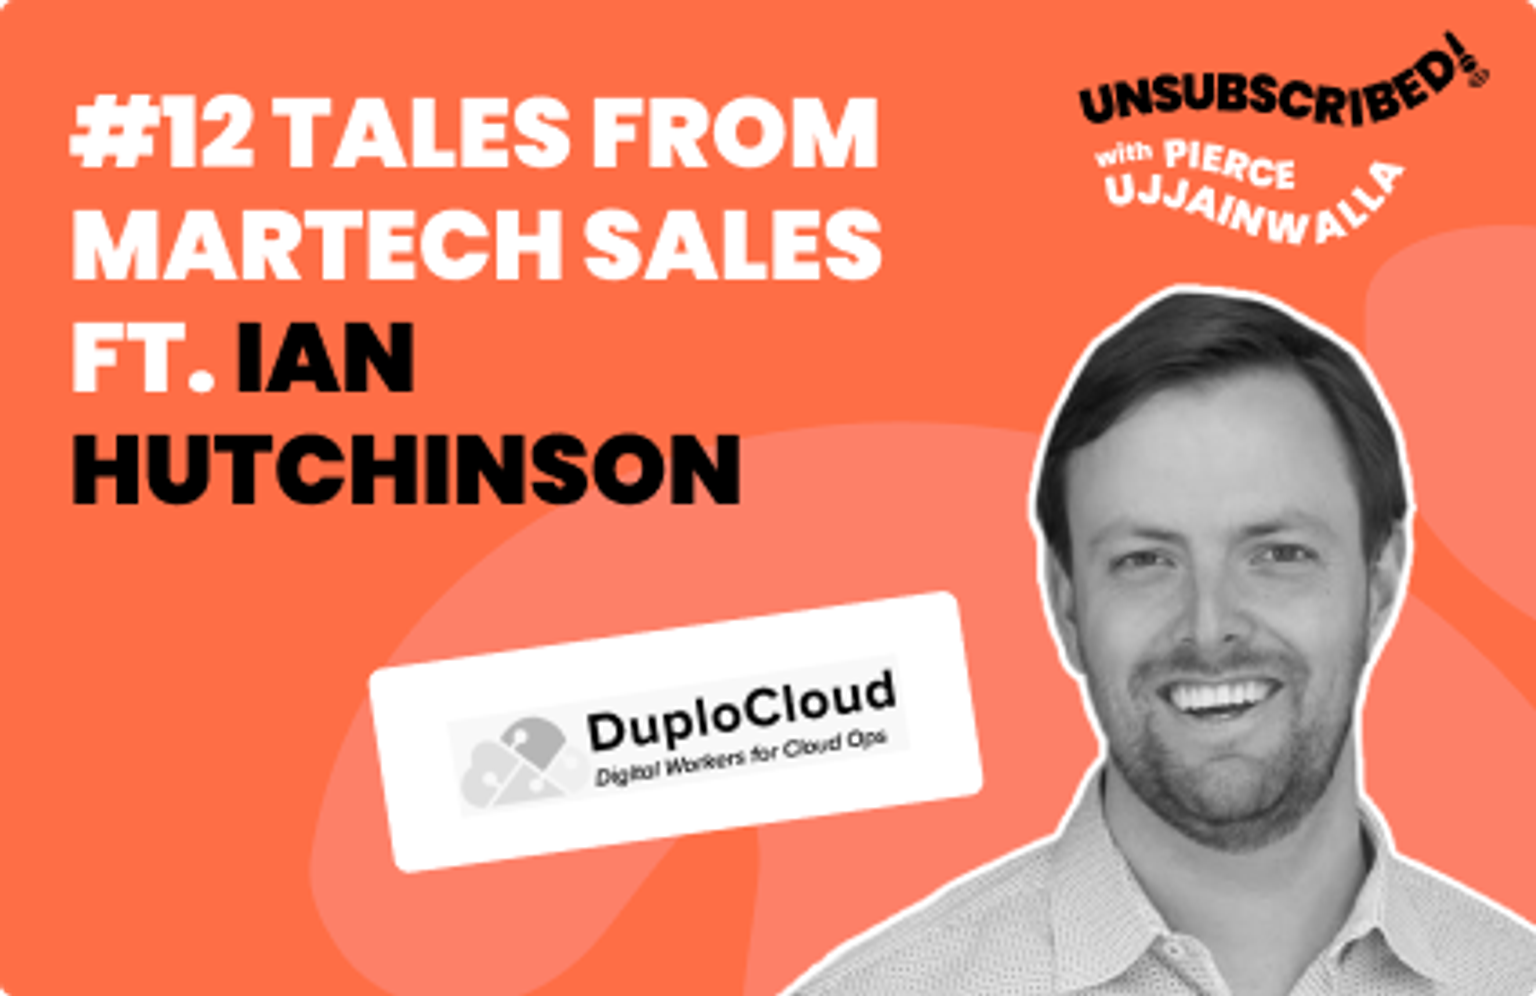 #12 Tales from MarTech sales ft. Ian Hutchinson, DuploCloud